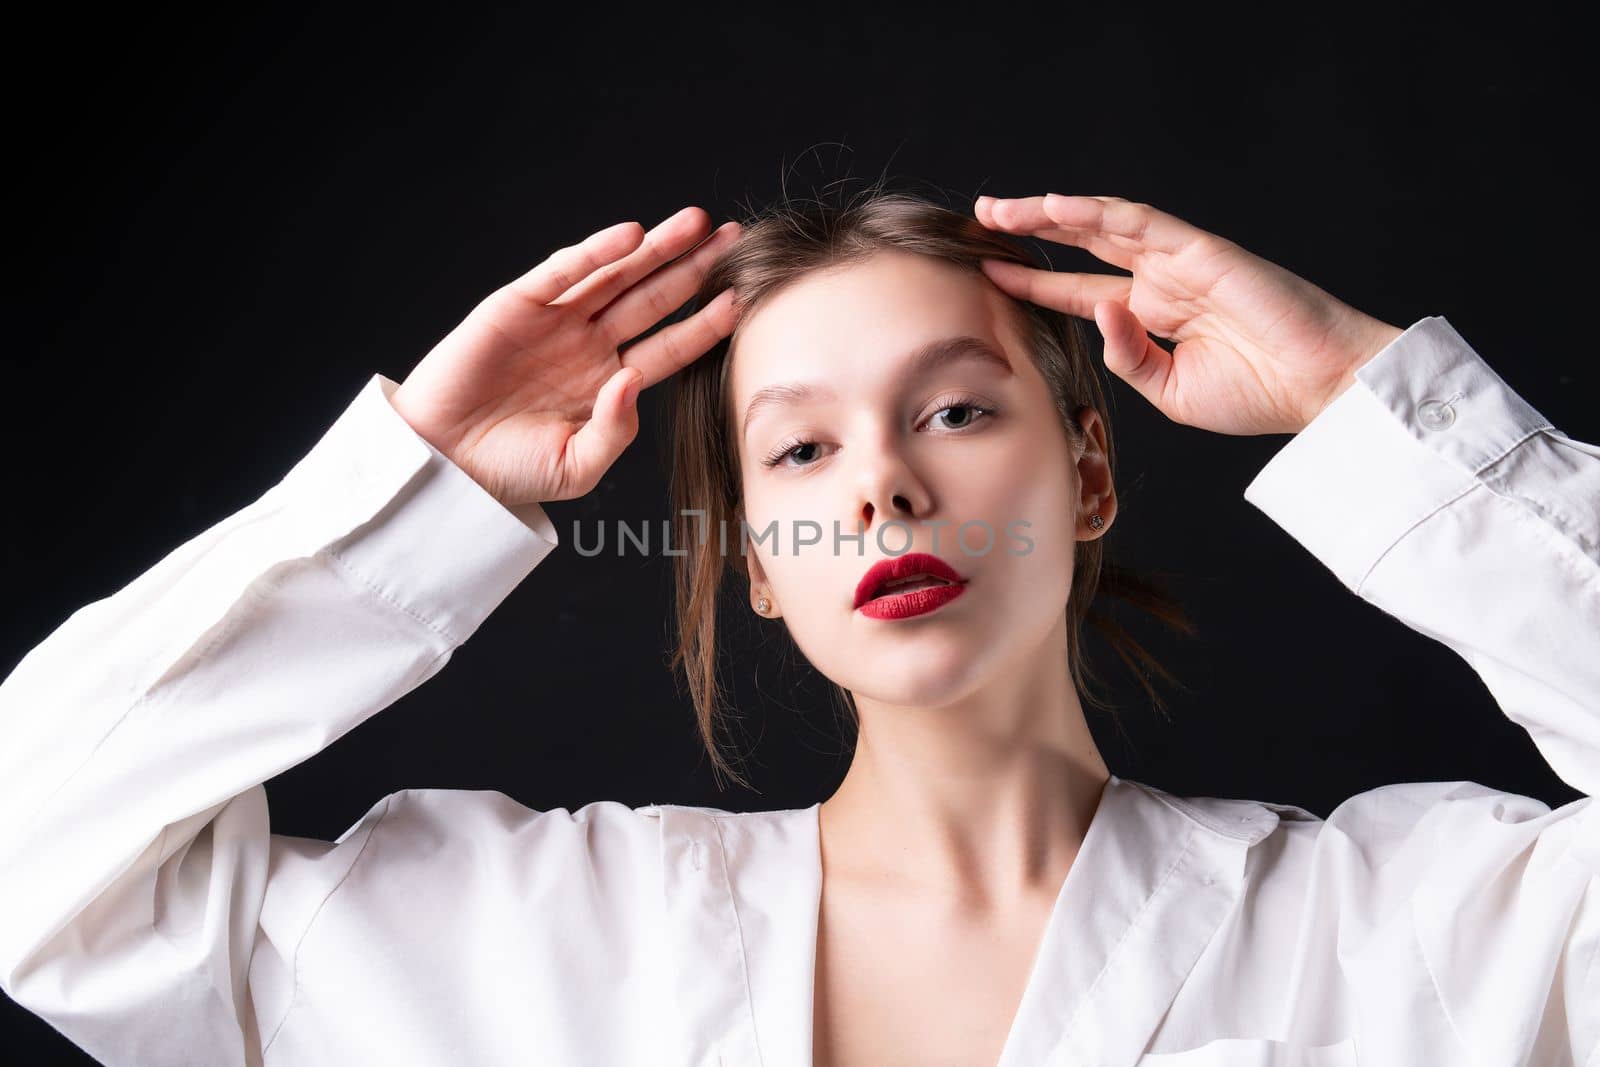 elegance attractive studio model hairstyle makeup Hands up posing female portrait beauty girl by 89167702191